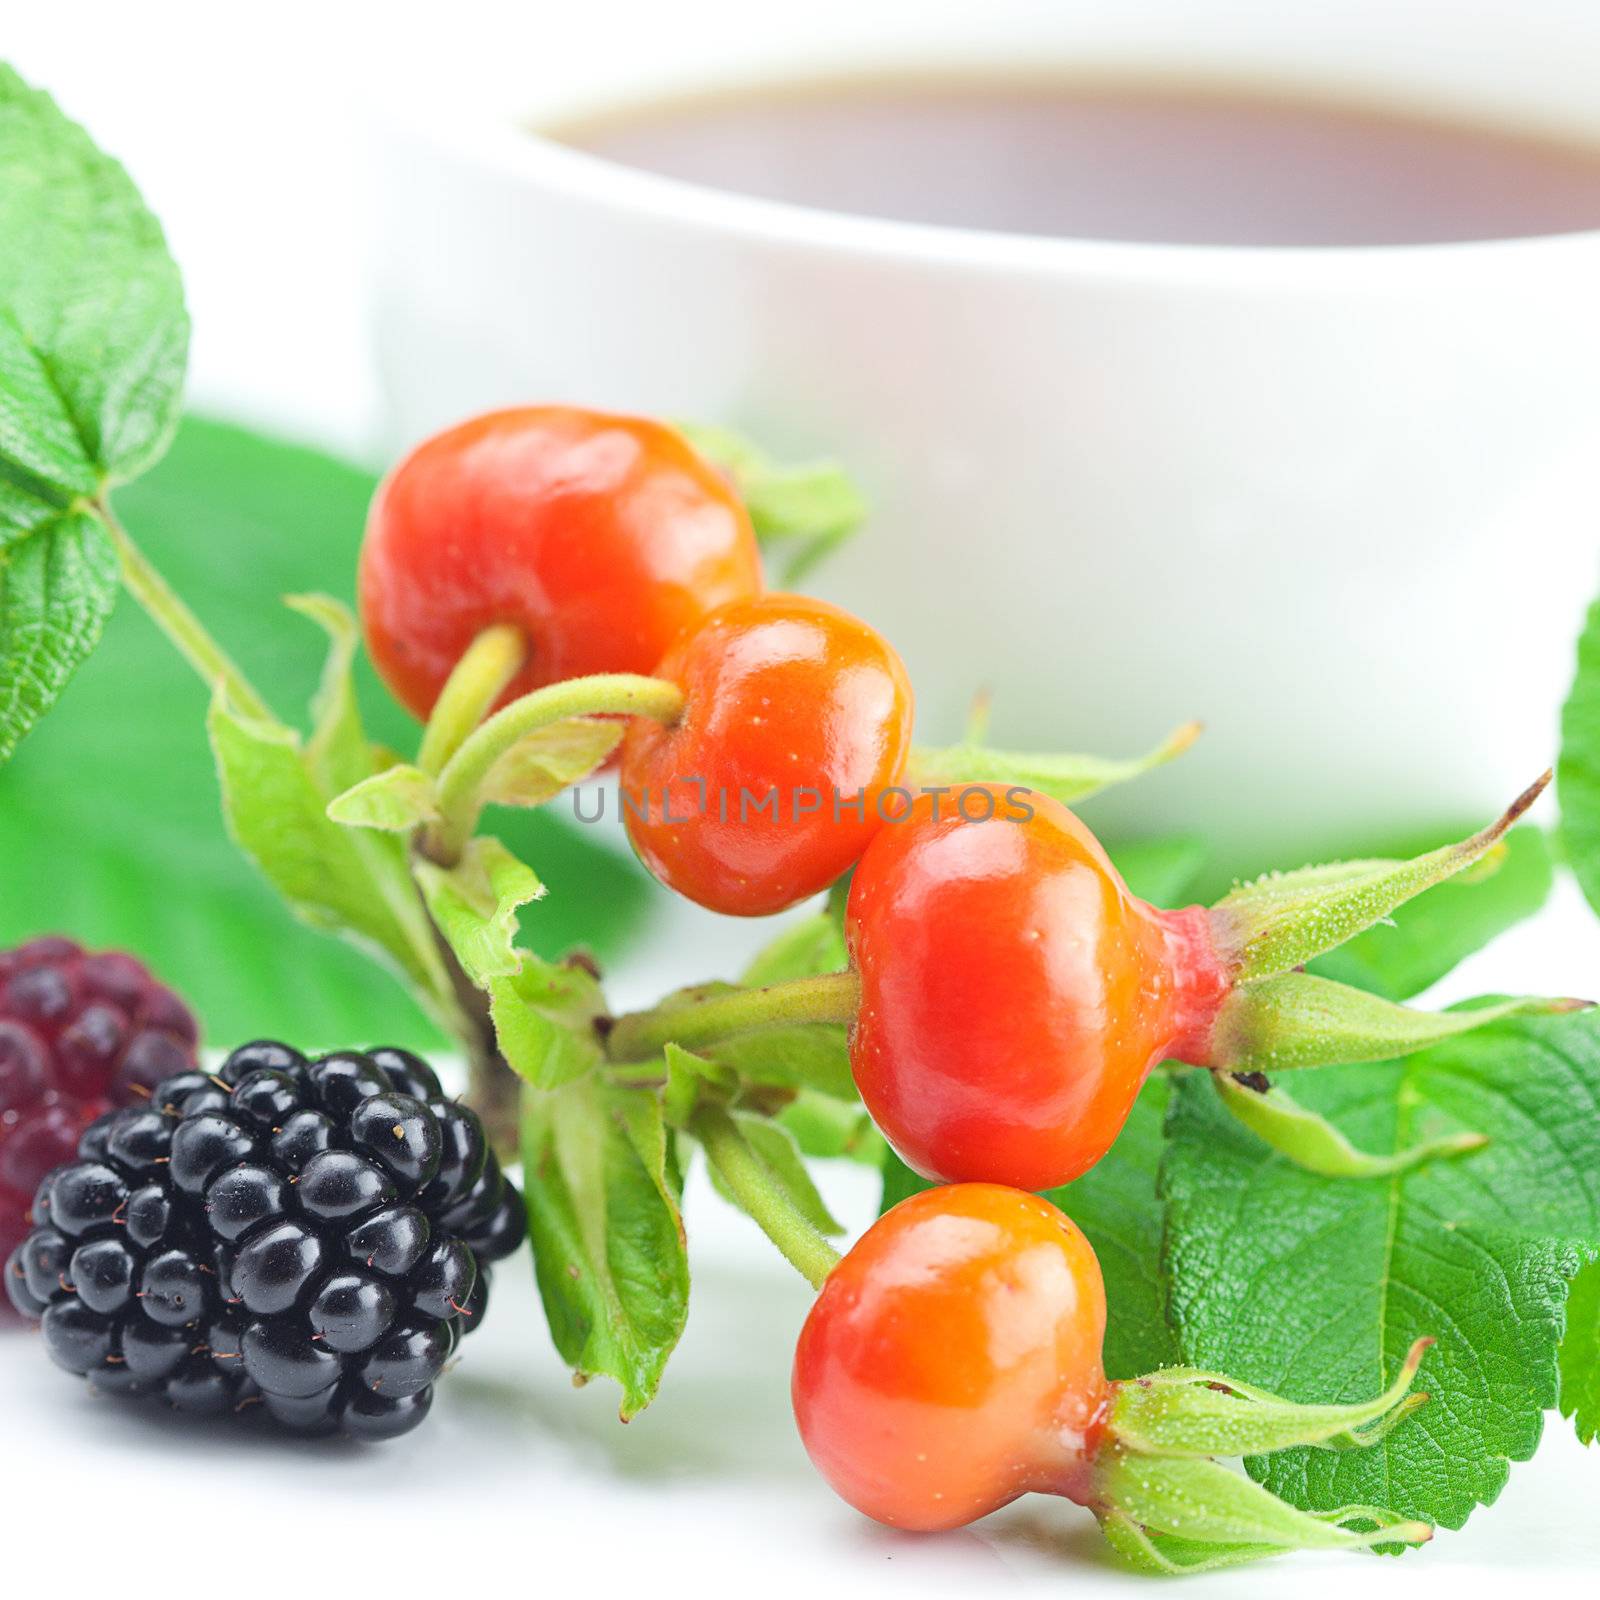 cup of tea, blackberry,raspberry and rosehip berries with leaves by jannyjus